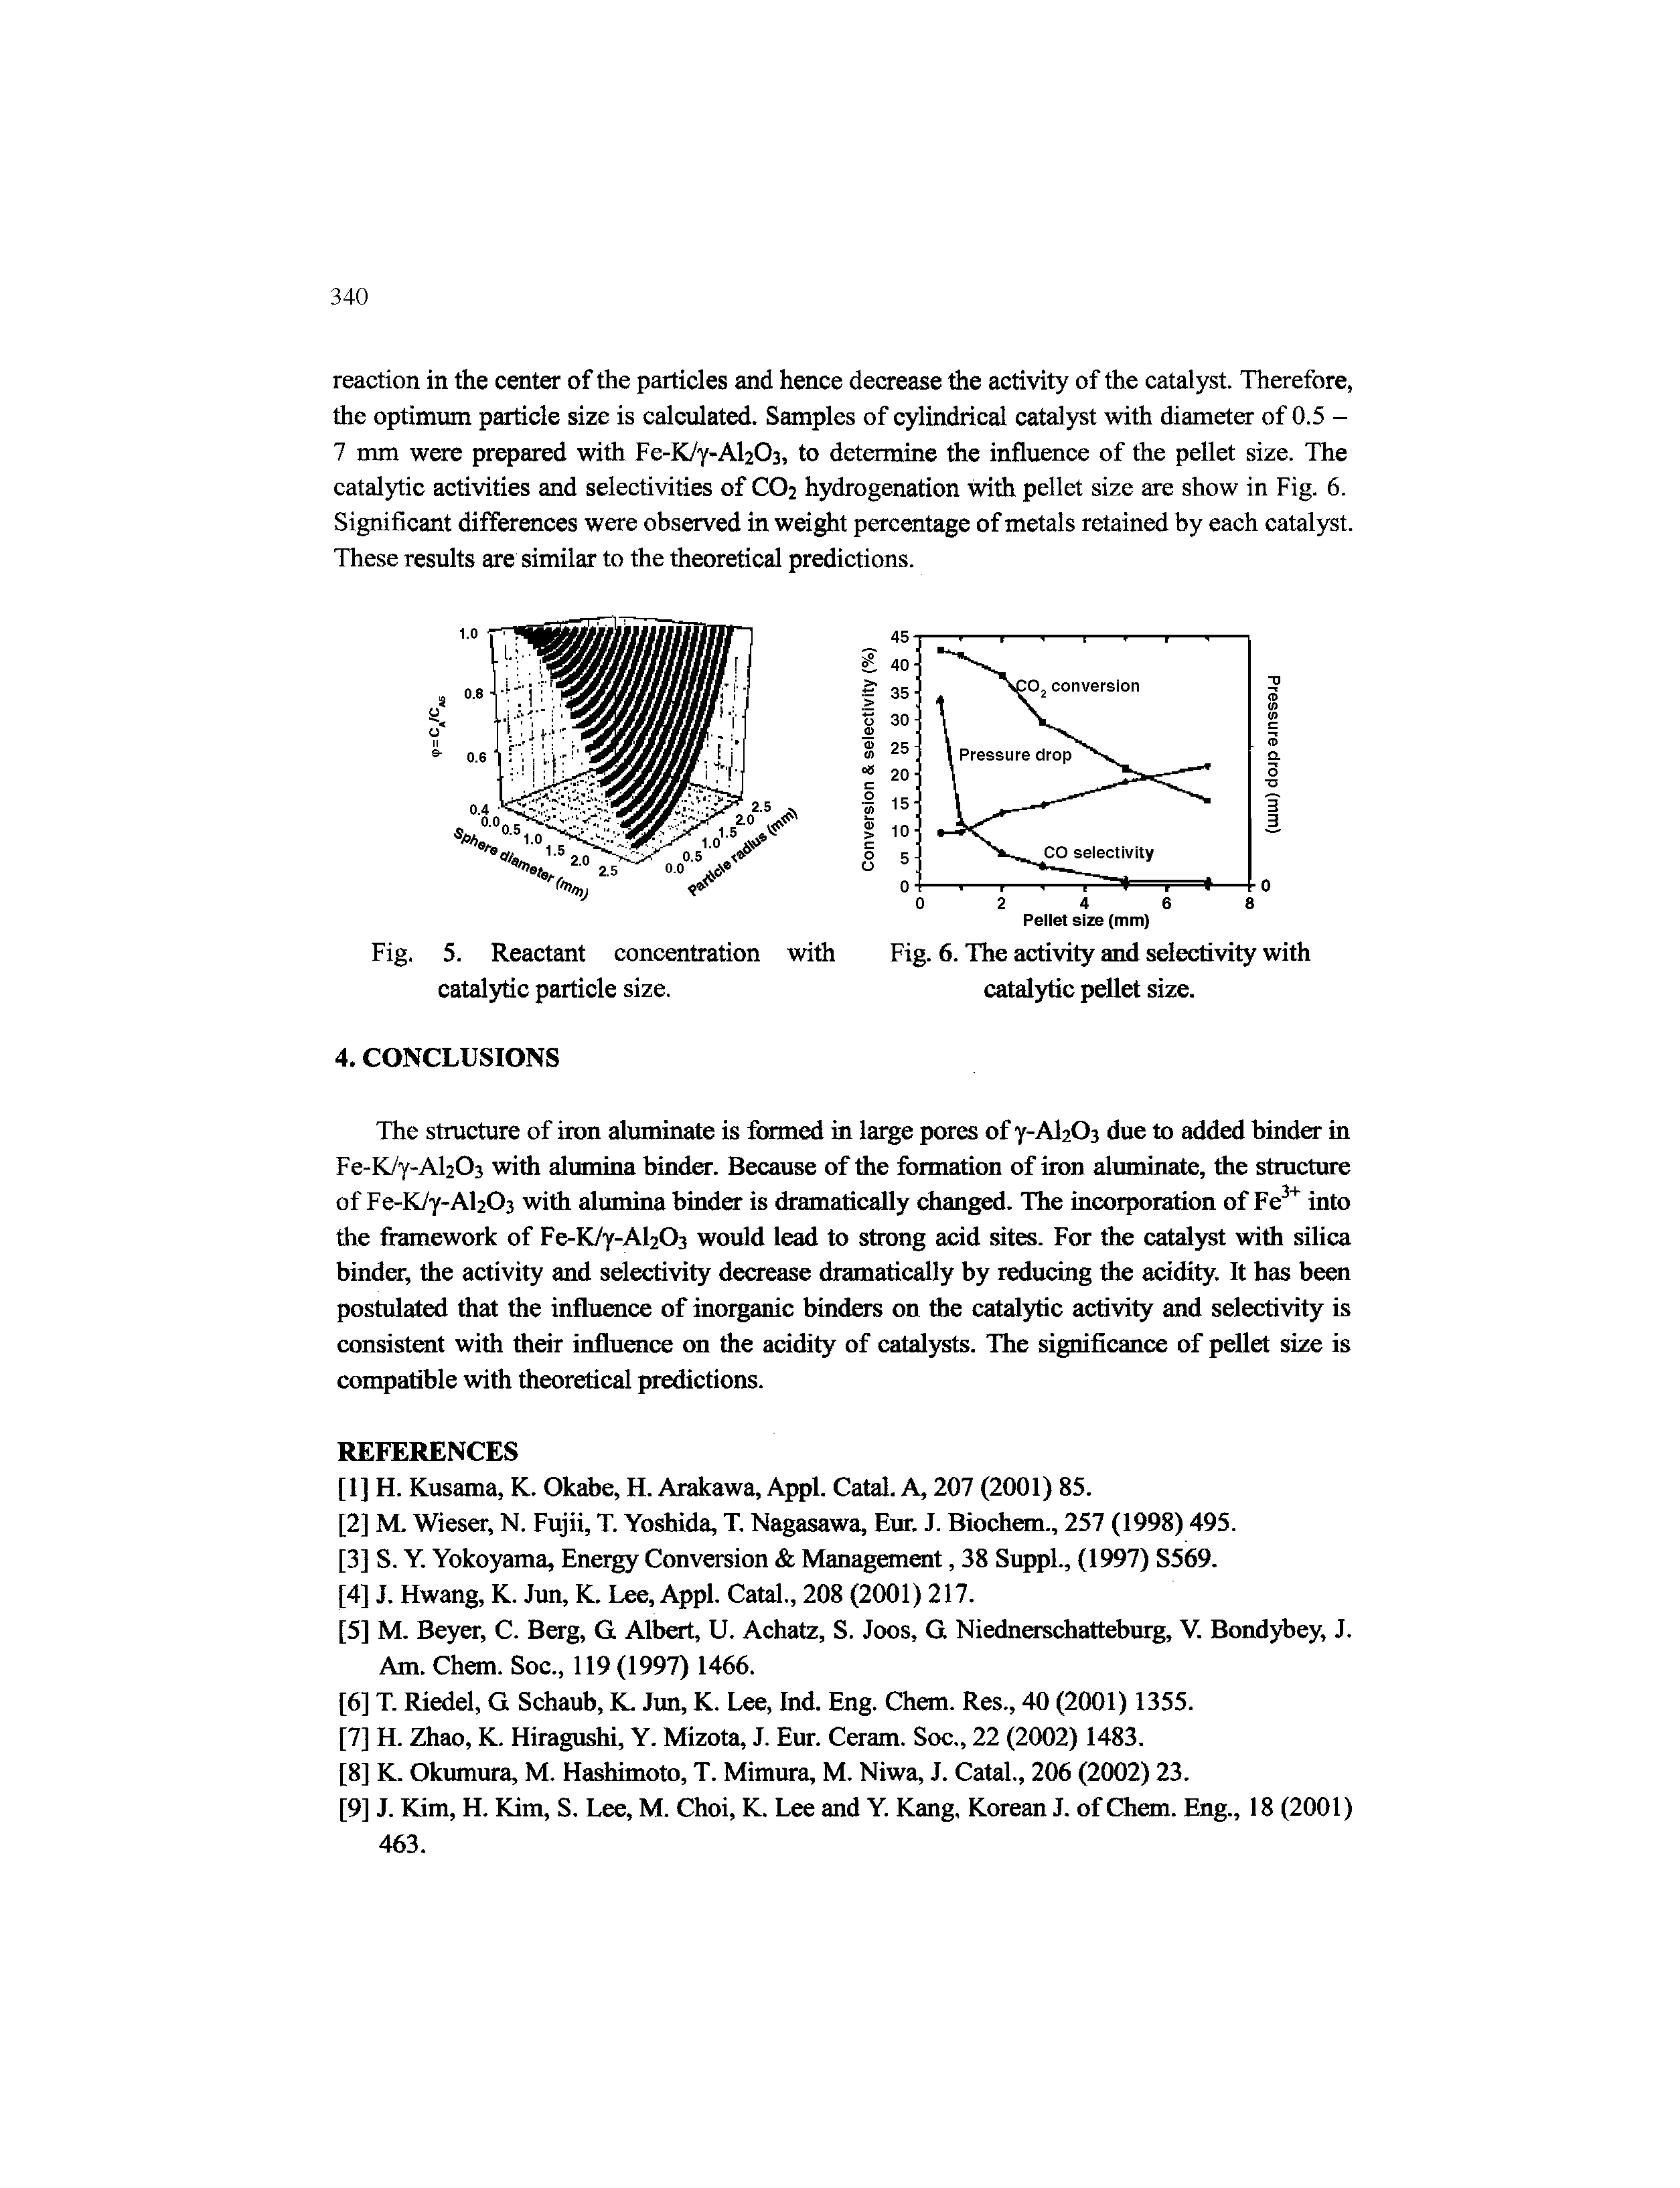 Fig. 5. Reactant concentration with catalytic particle size.